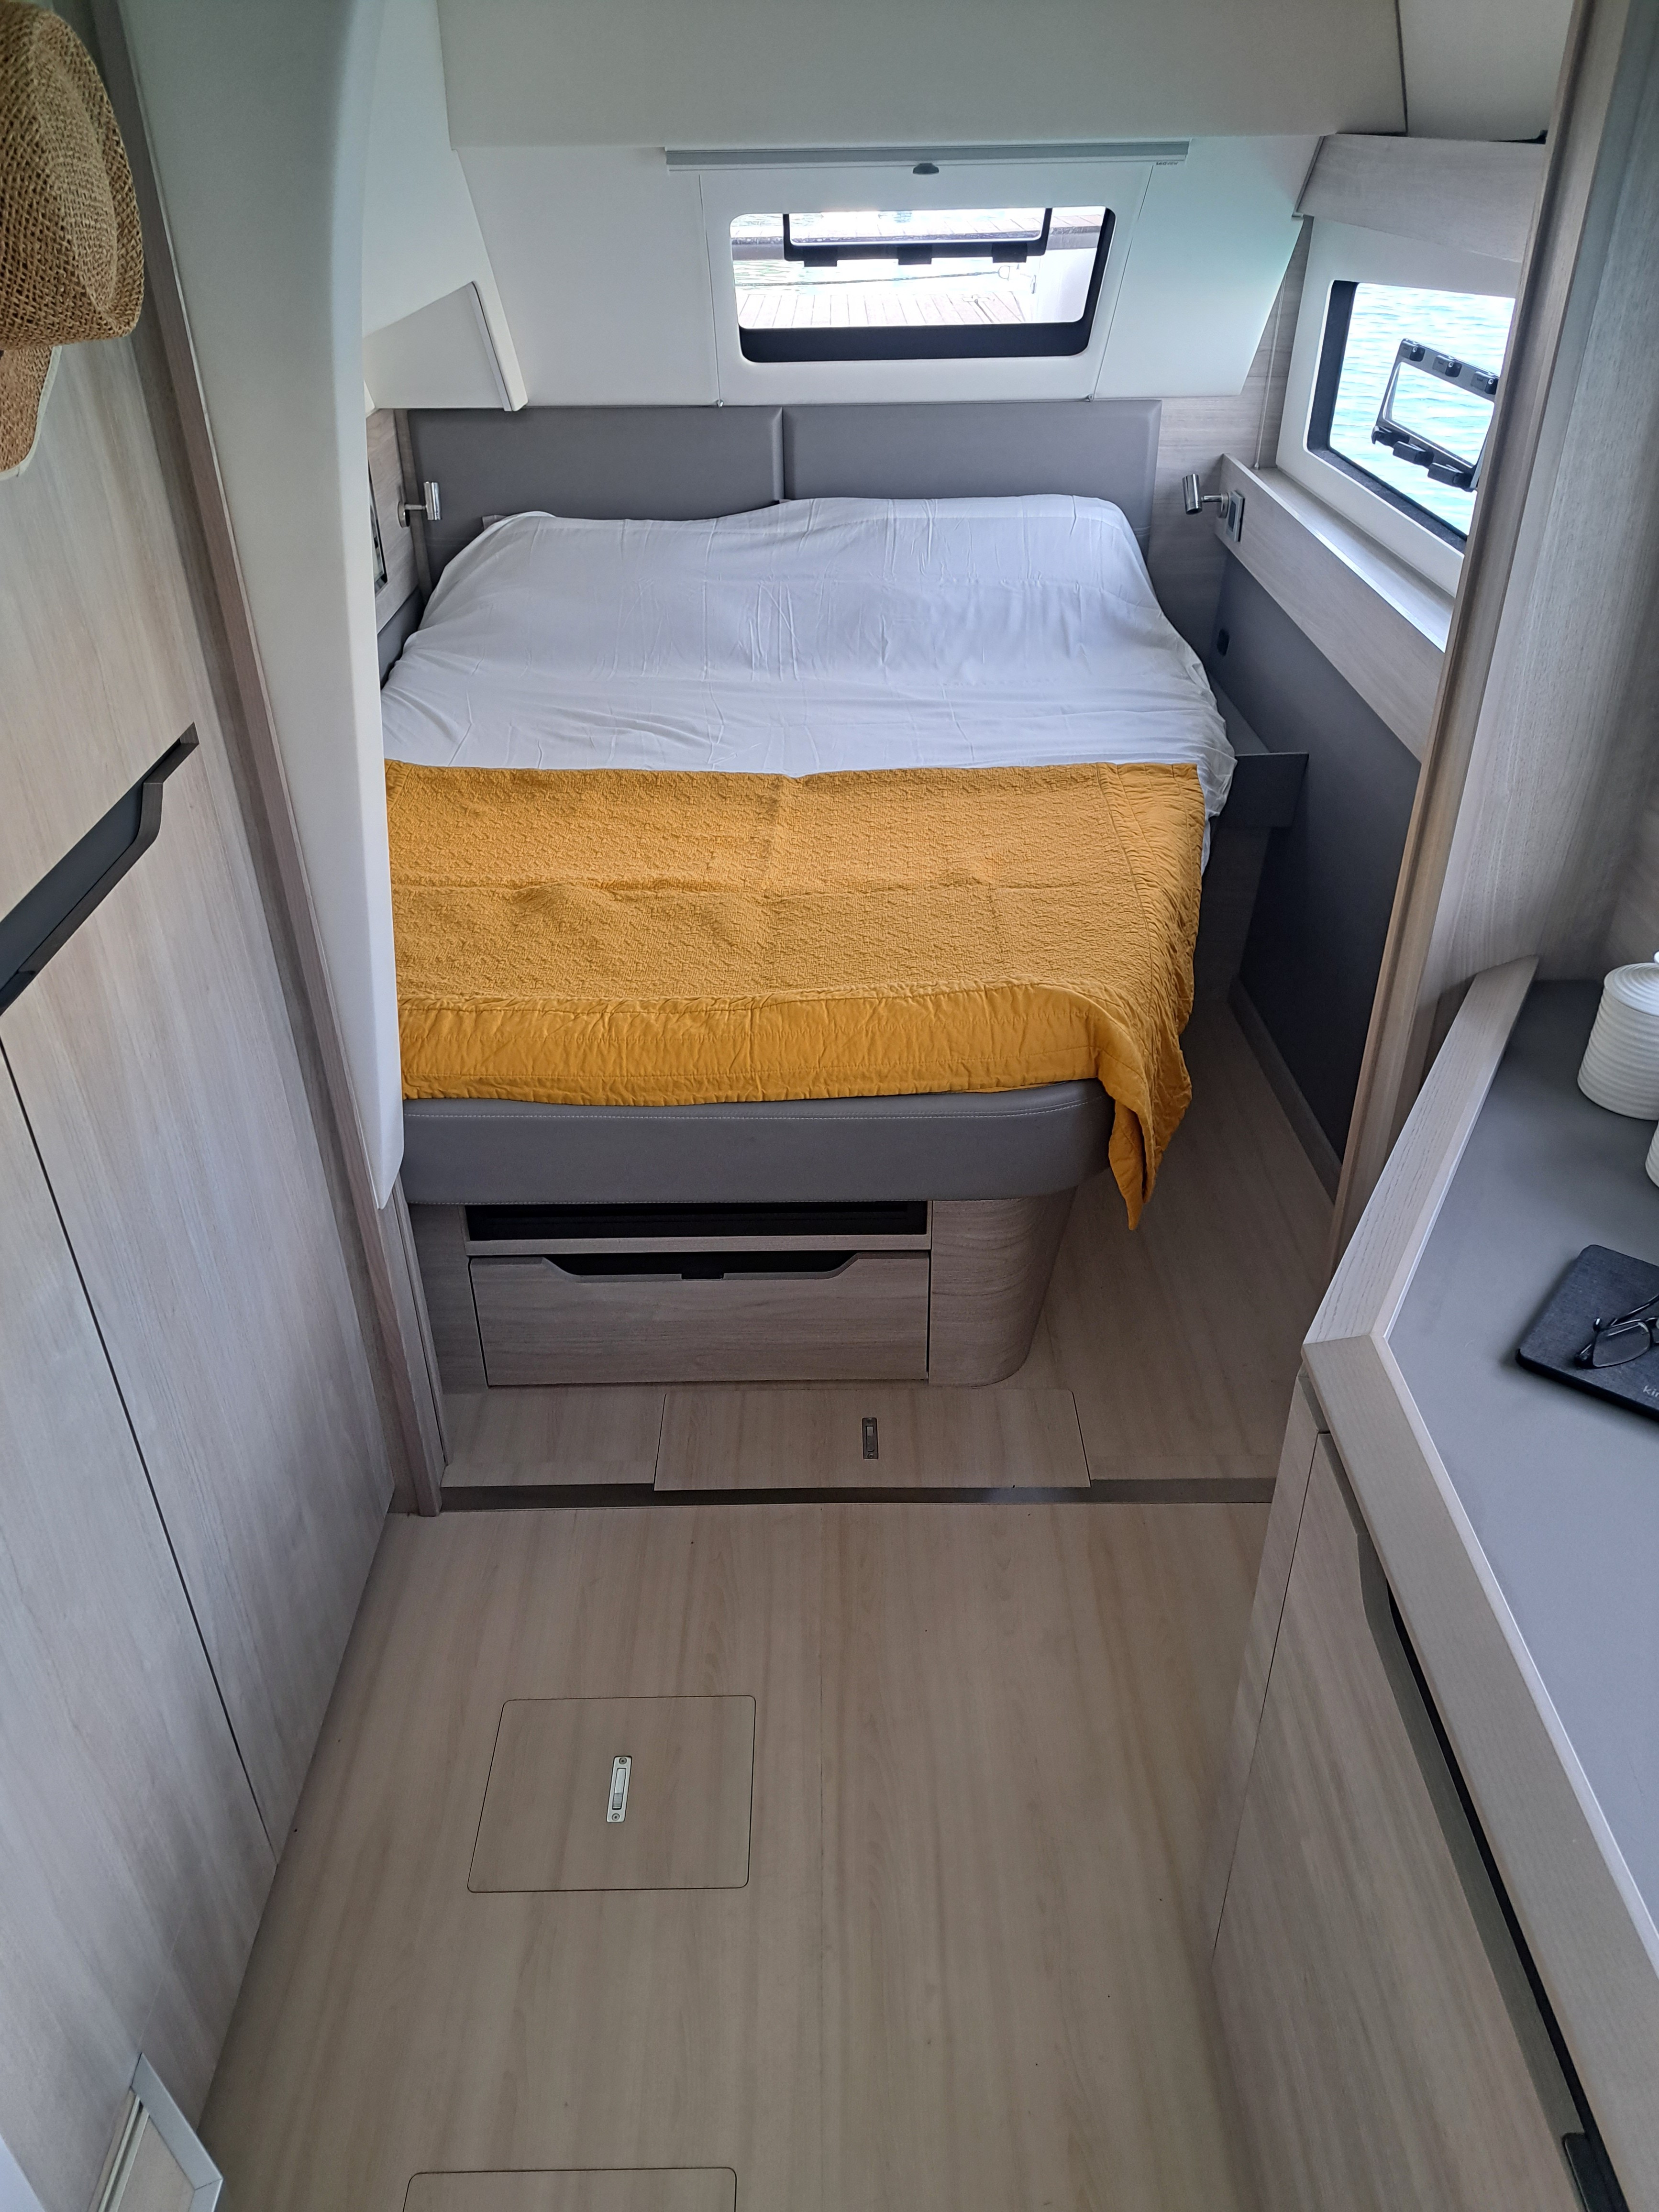 Used Sail Catamaran for Sale 2023 Ocean Class 50 Additional Information